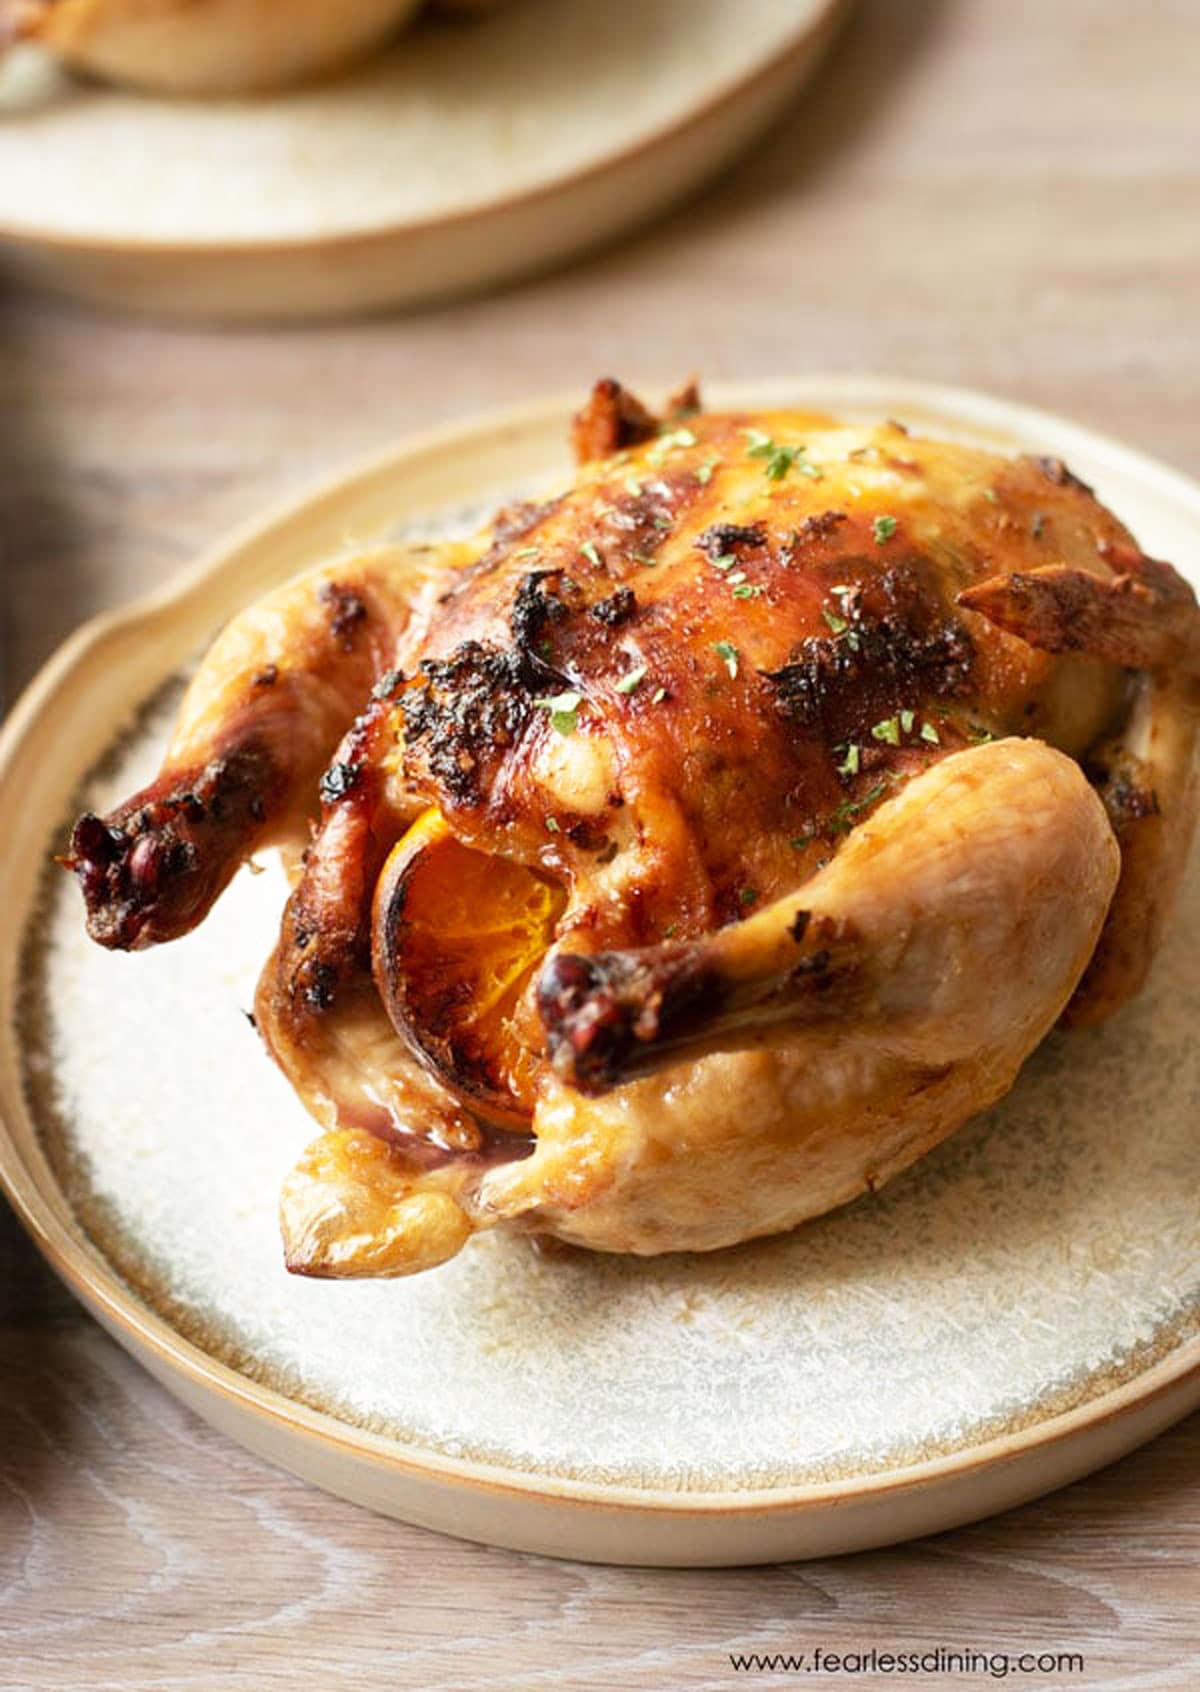 A roasted cornish game hen on a large plate.